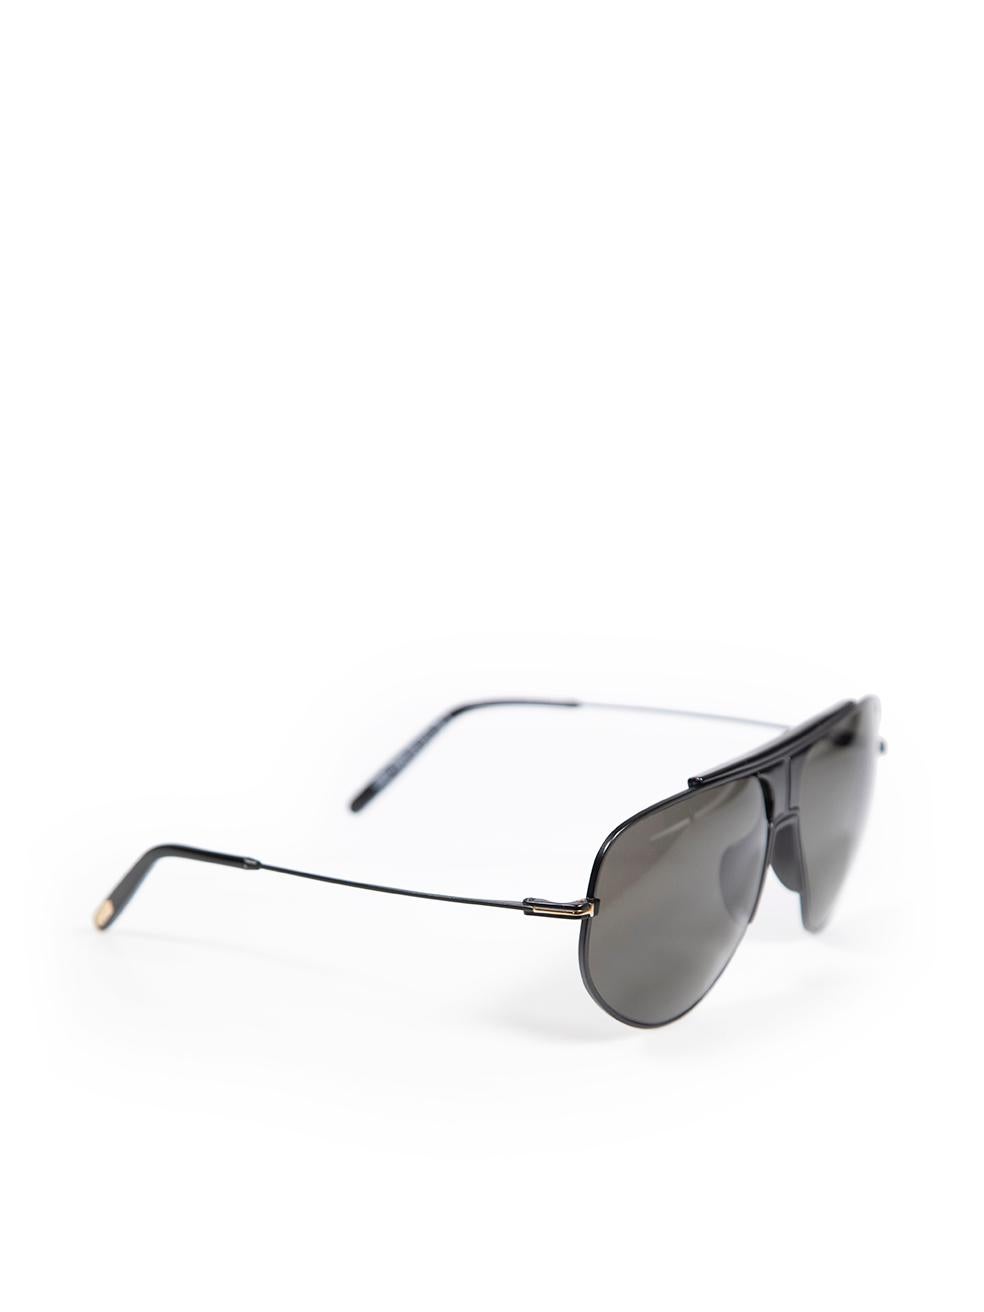 CONDITION is Very good. Hardly any visible wear to sunglasses is evident on this used Tom Ford designer resale item. This item comes with original case.
 
 
 
 Details
 
 
 Model: Addison
 
 Black
 
 Metal
 
 Sunglasses
 
 Aviator
 
 Black tinted